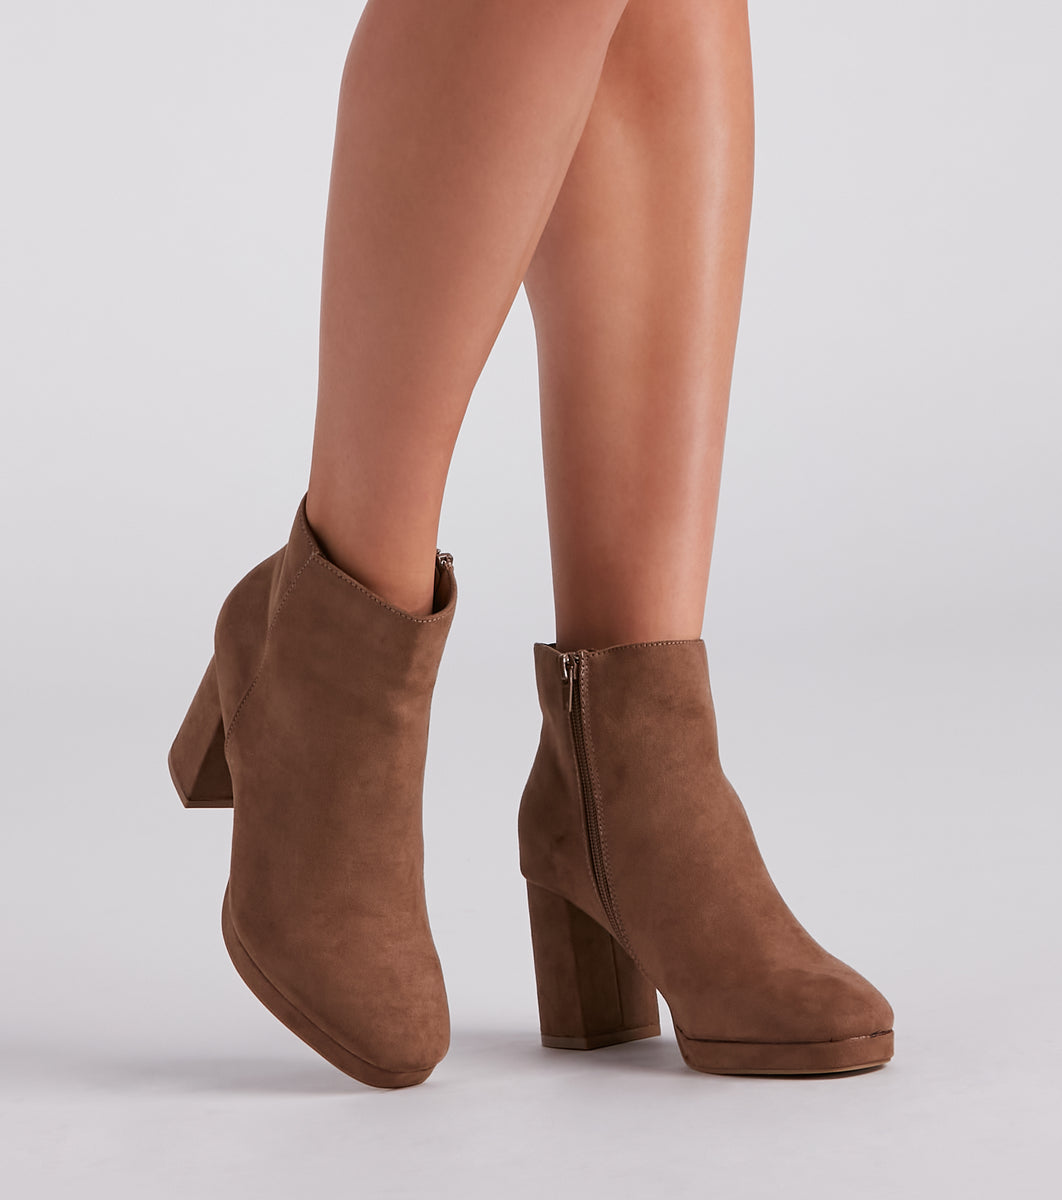 Autumn Perfection Faux Suede Booties